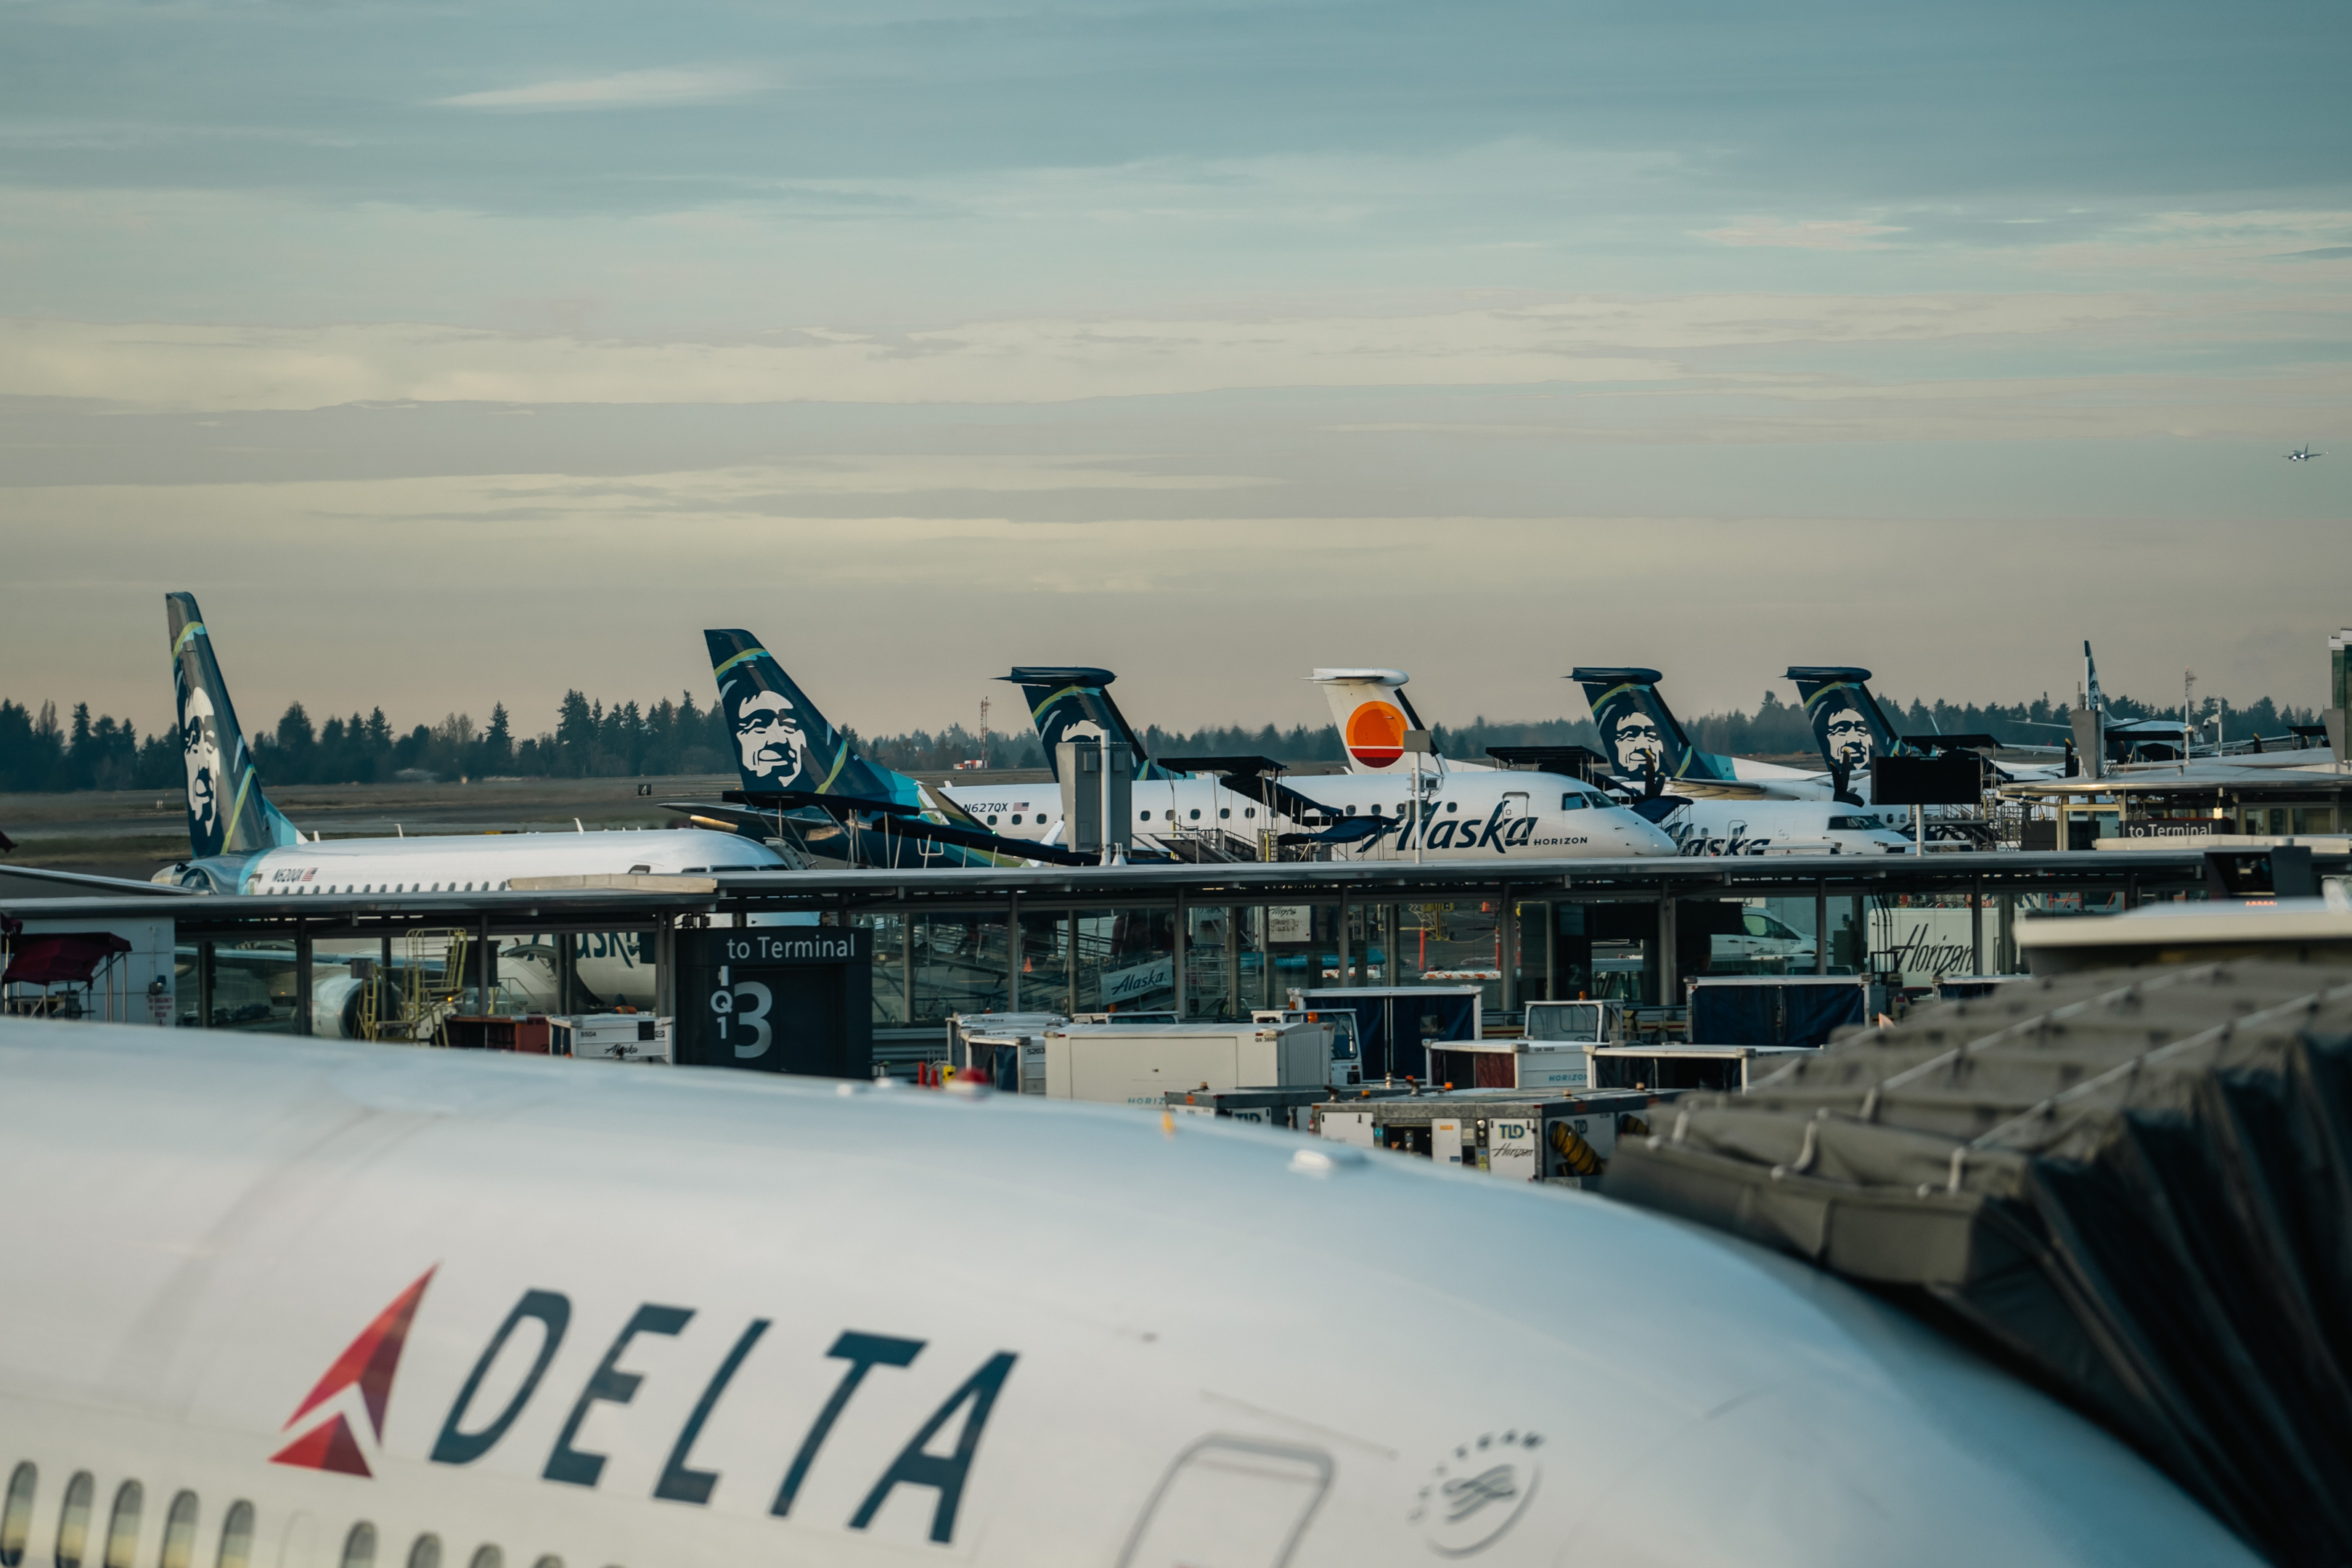 Delta Airlines aircraft parked in front of other aircraft.